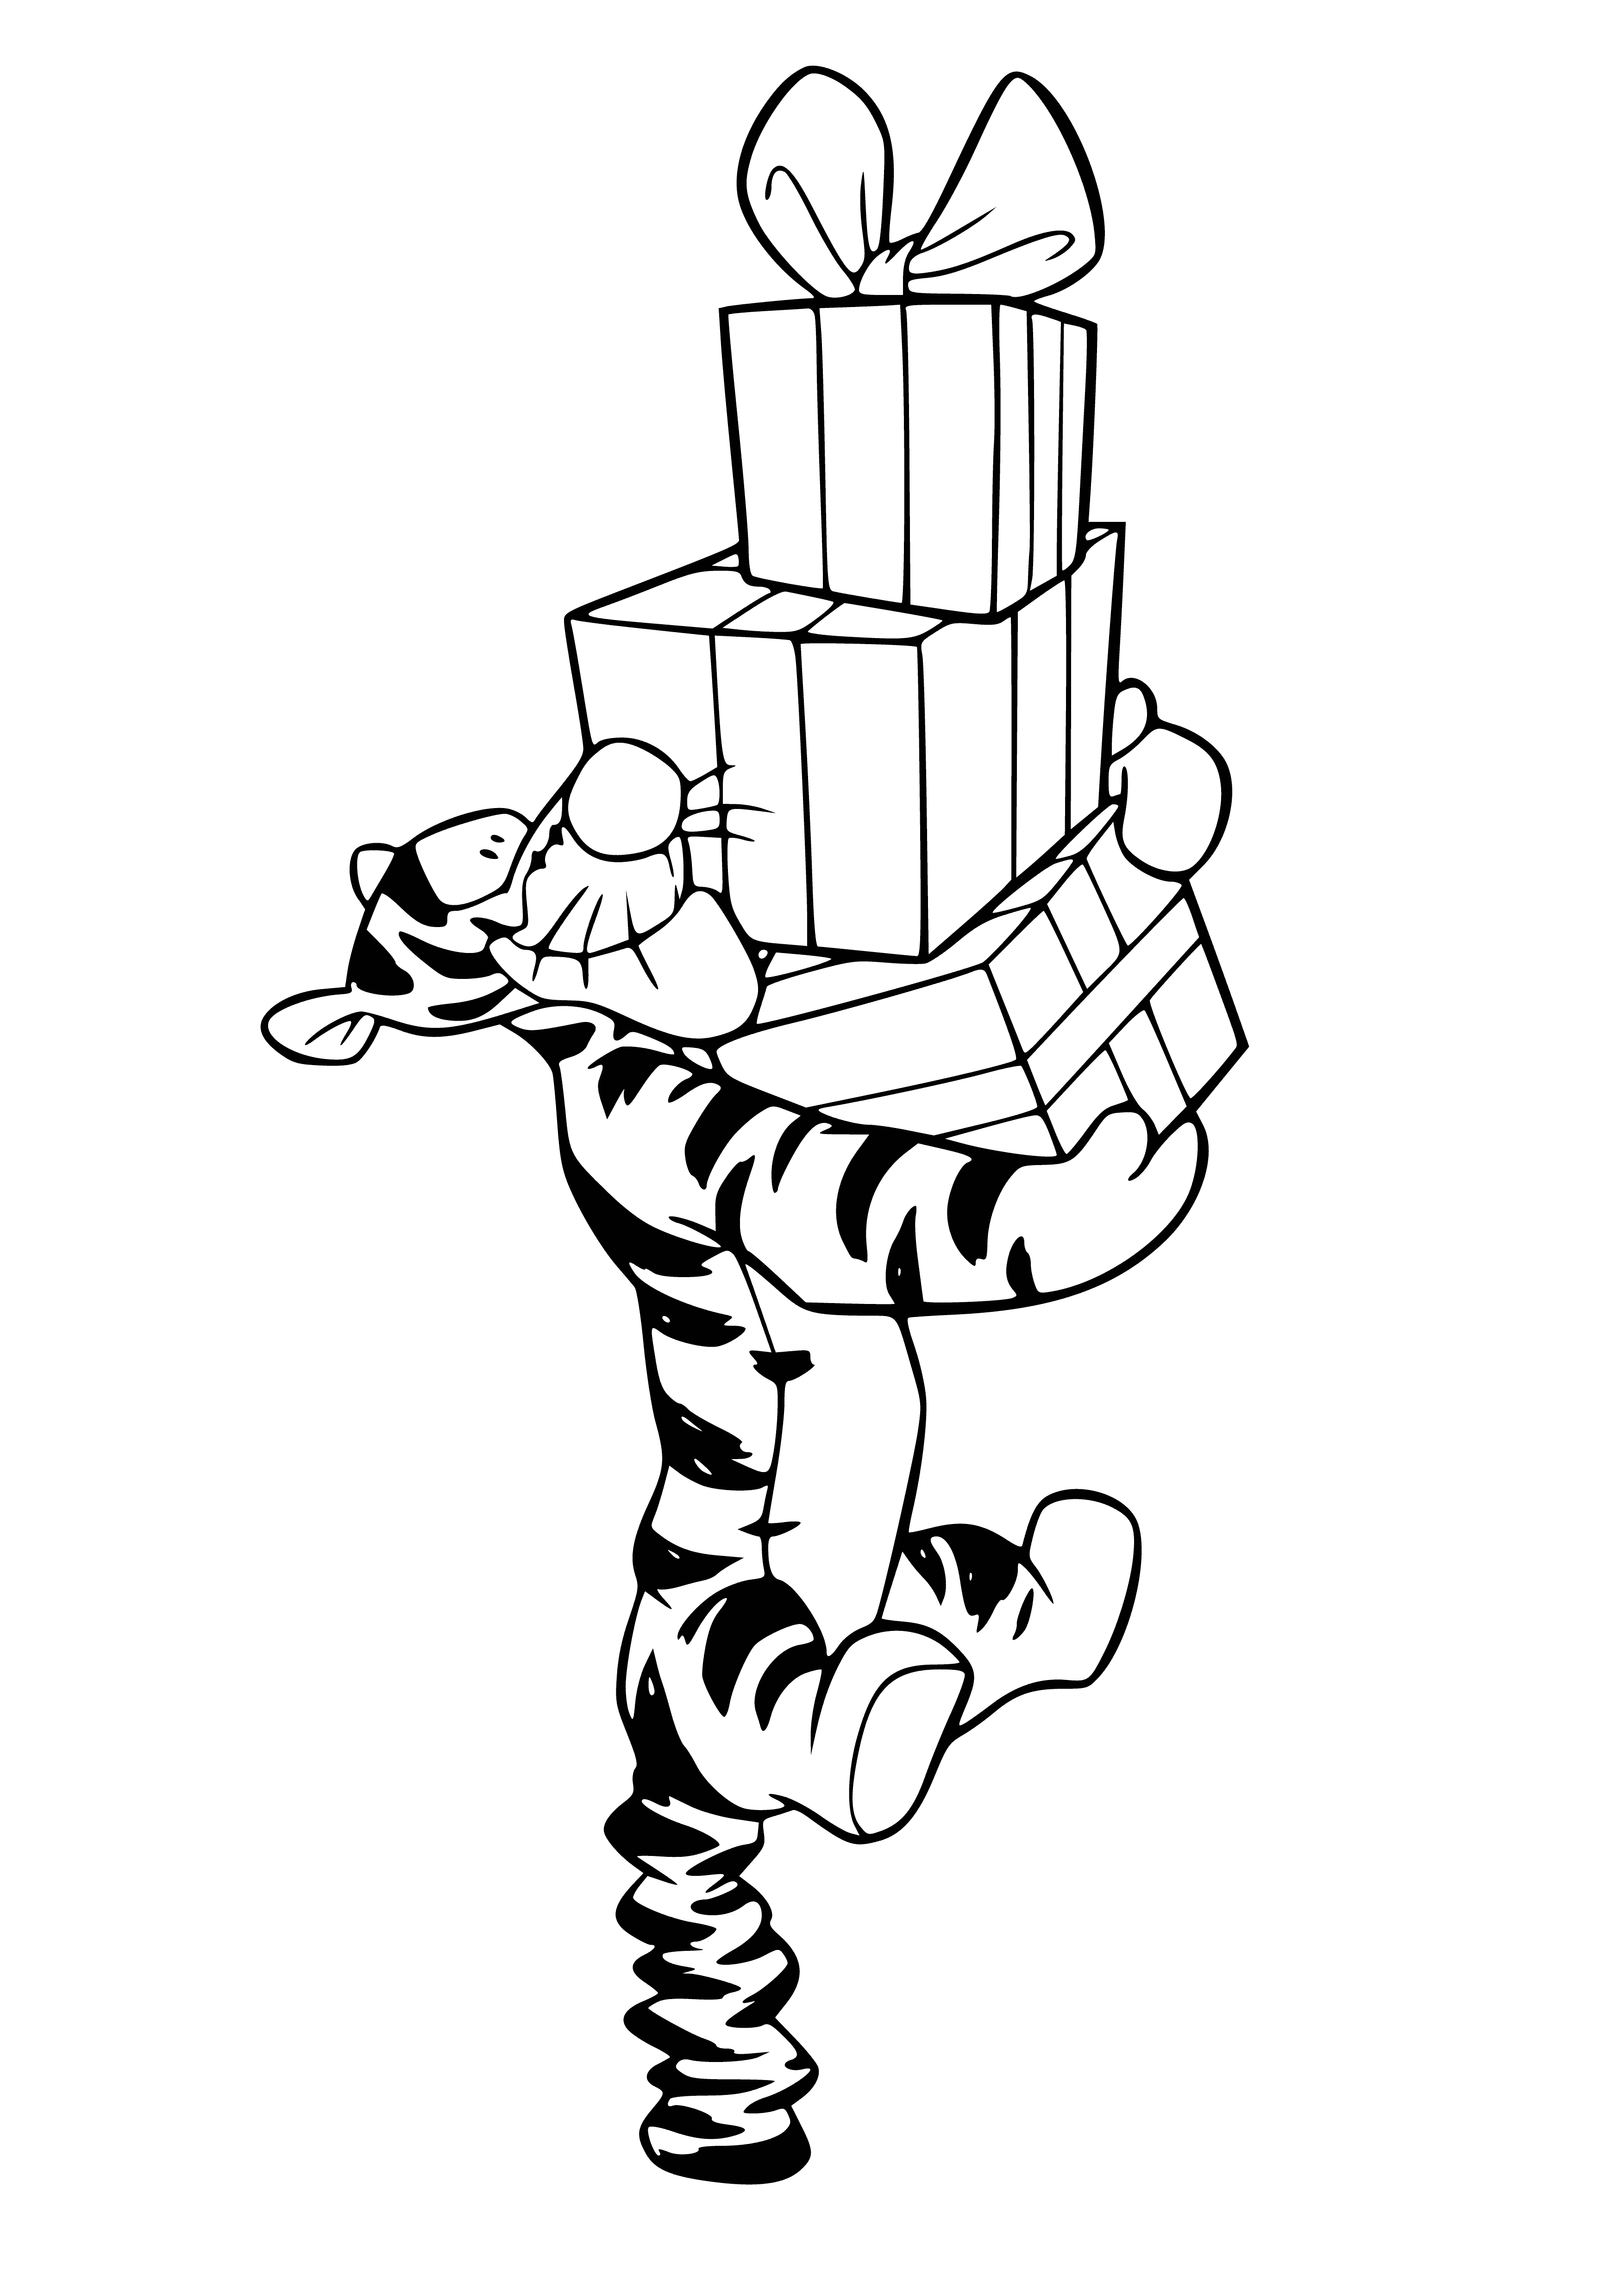 coloring page: Large orange tiger with presents, surrounded by Hundred Acre Wood animals all looking with smiles.